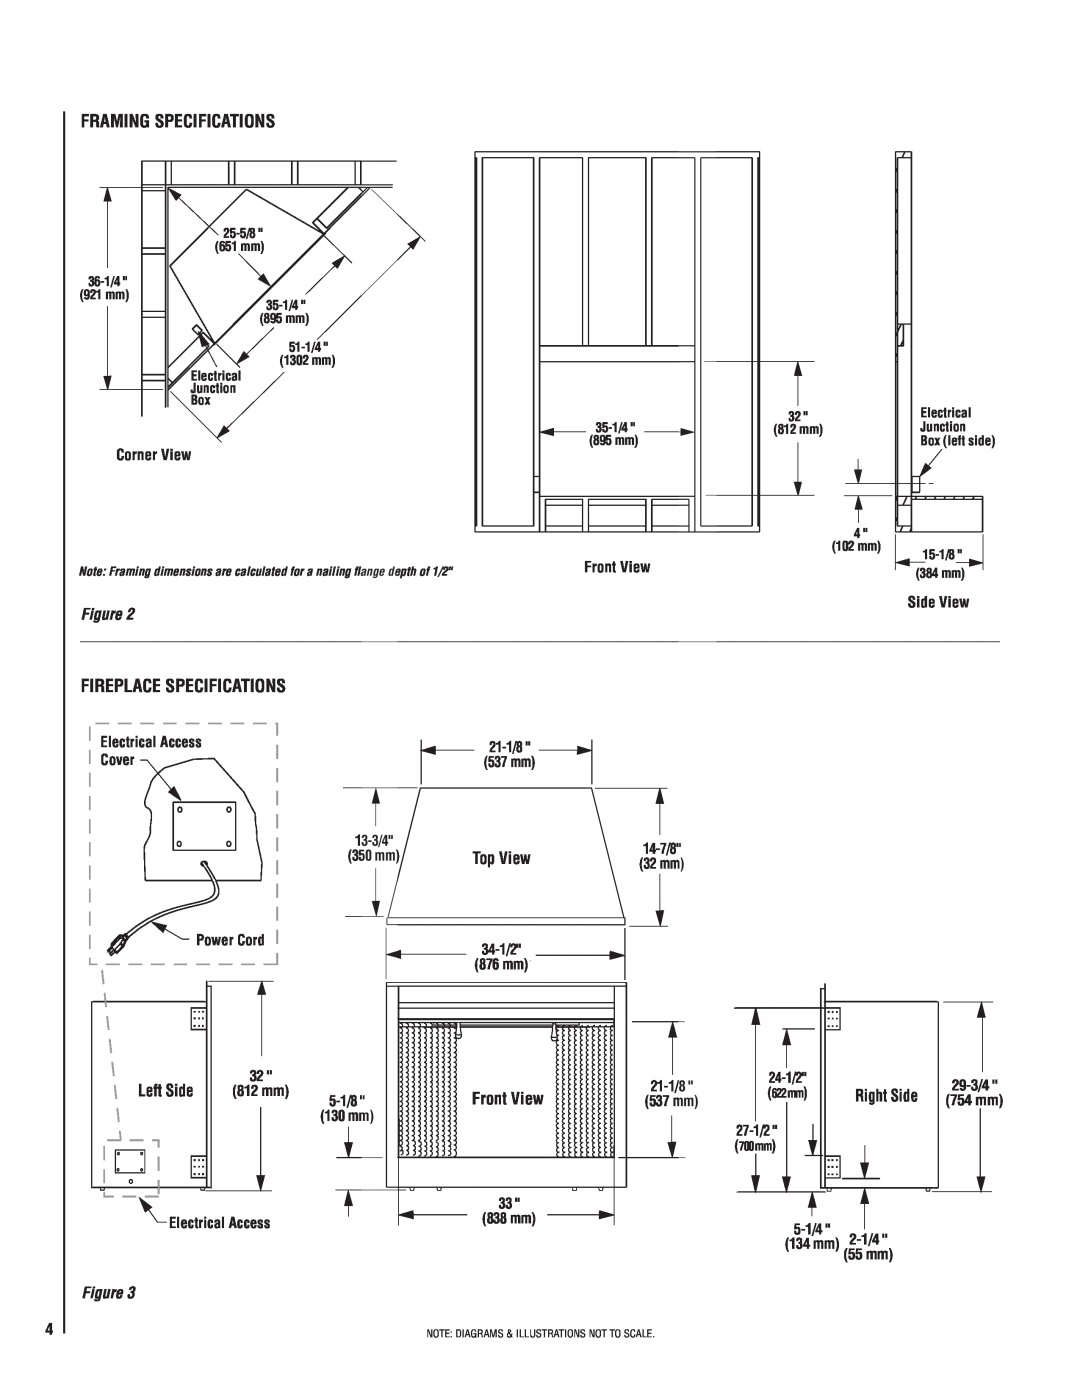 Maytag MPE-33R Framing Specifications, Fireplace Specifications, Left Side, Corner View, Front View, Side View, 21-1/8 